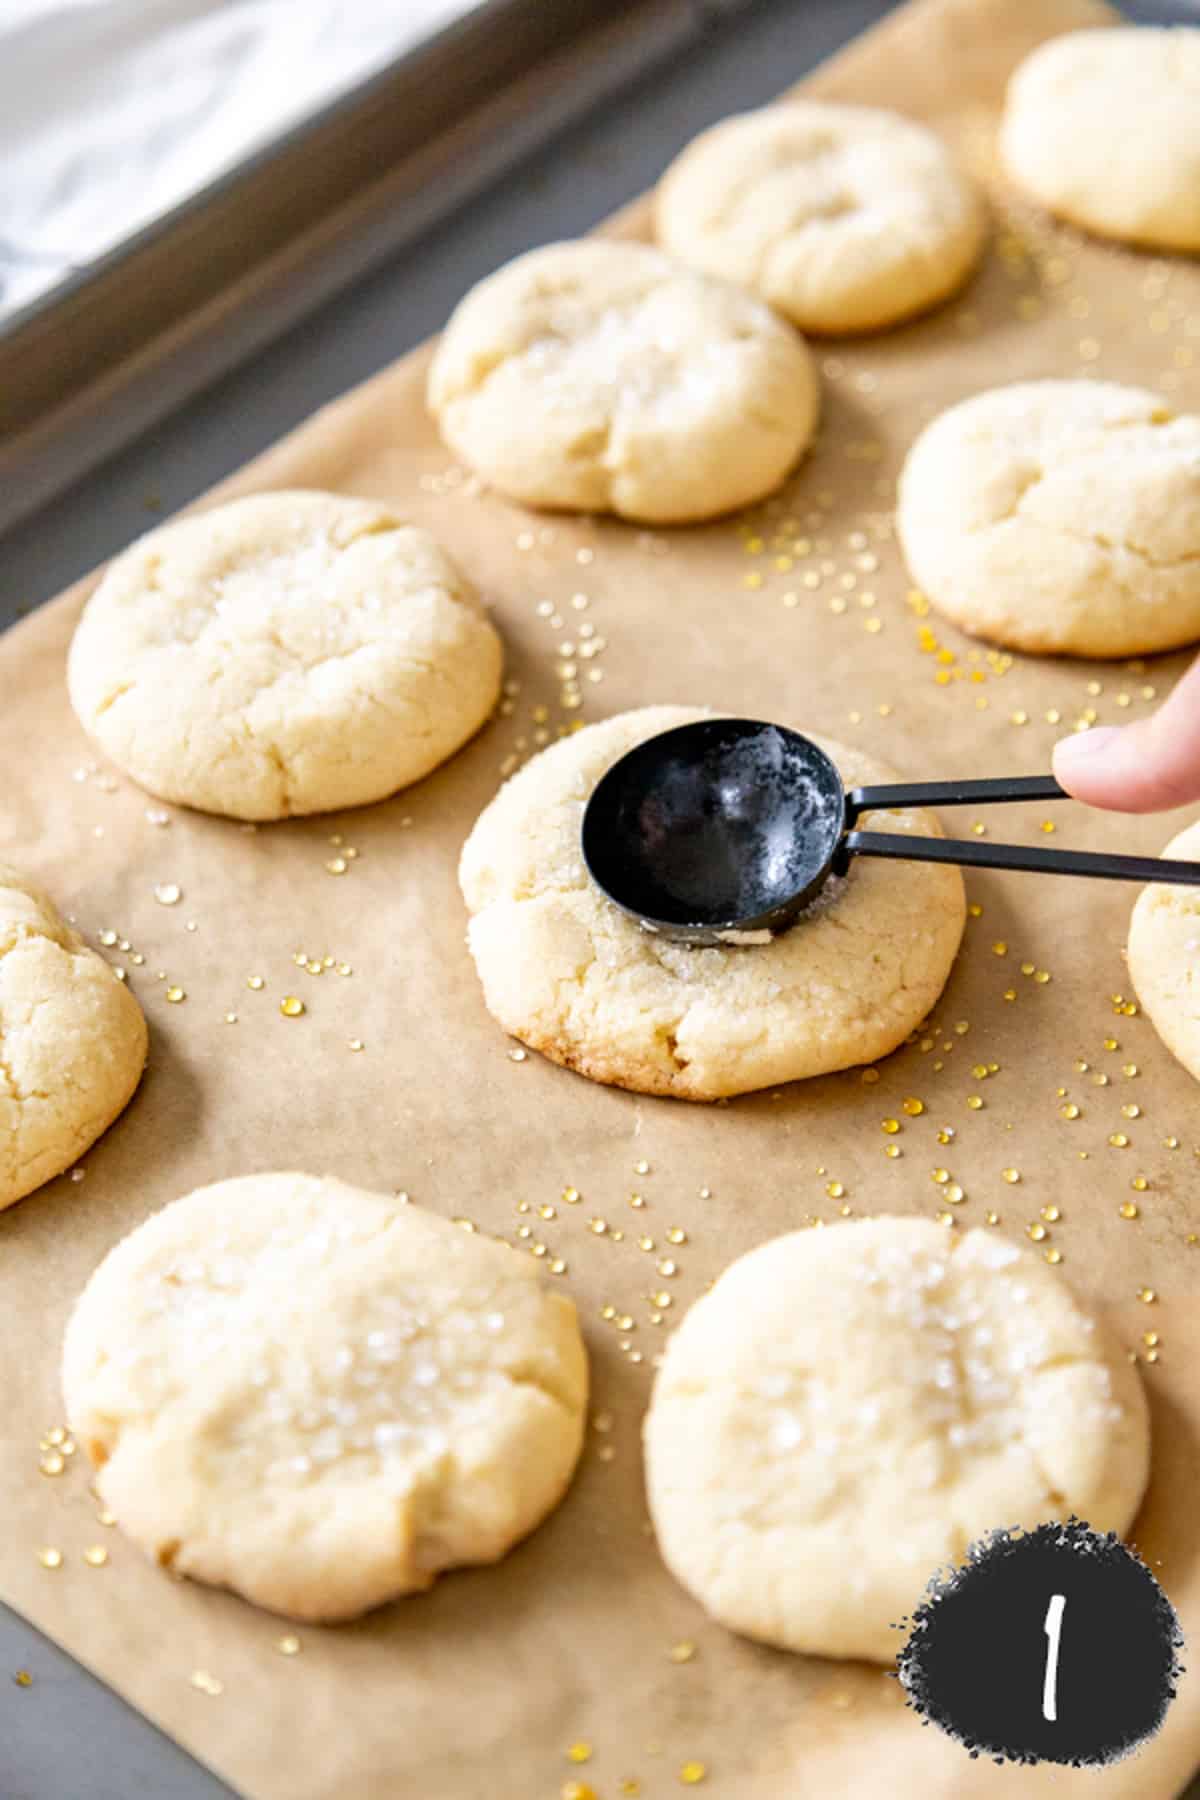 A baking sheet with sugar cookies and a hand pressing a black measuring spoon into the center of the cookie to make and indentation.